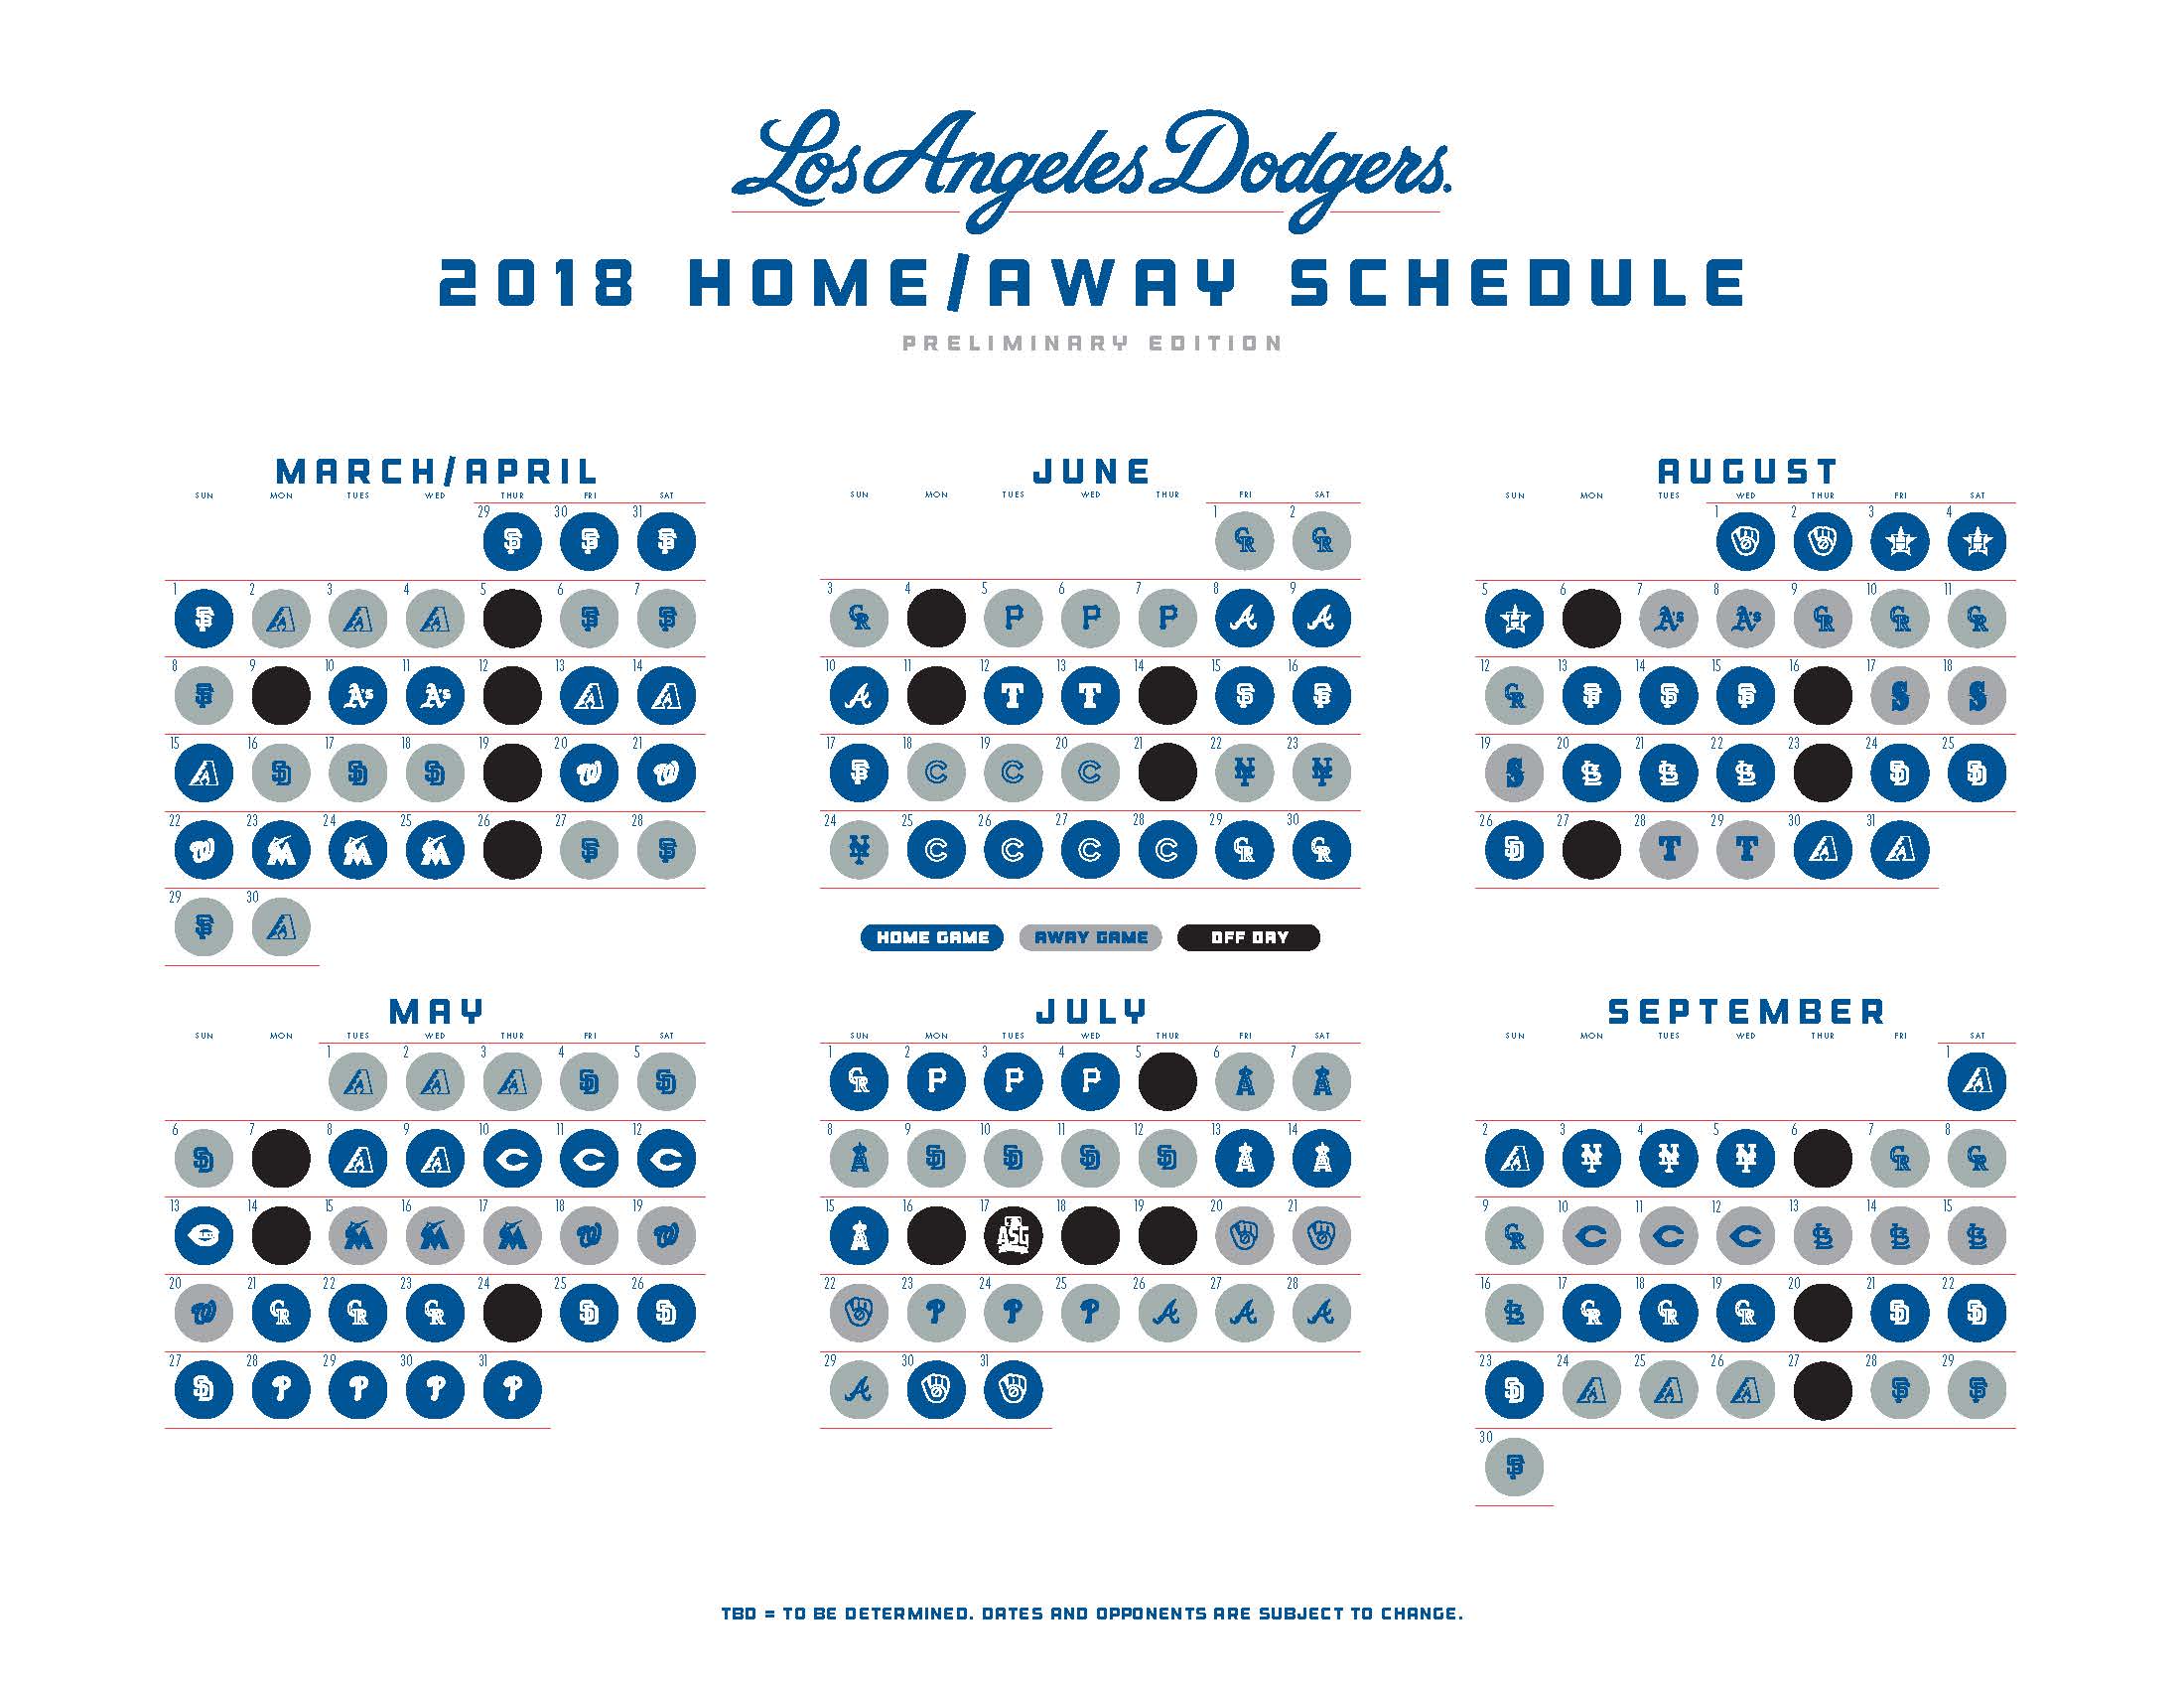 MLB schedule 2018: Dodgers open and close next season vs. Giants